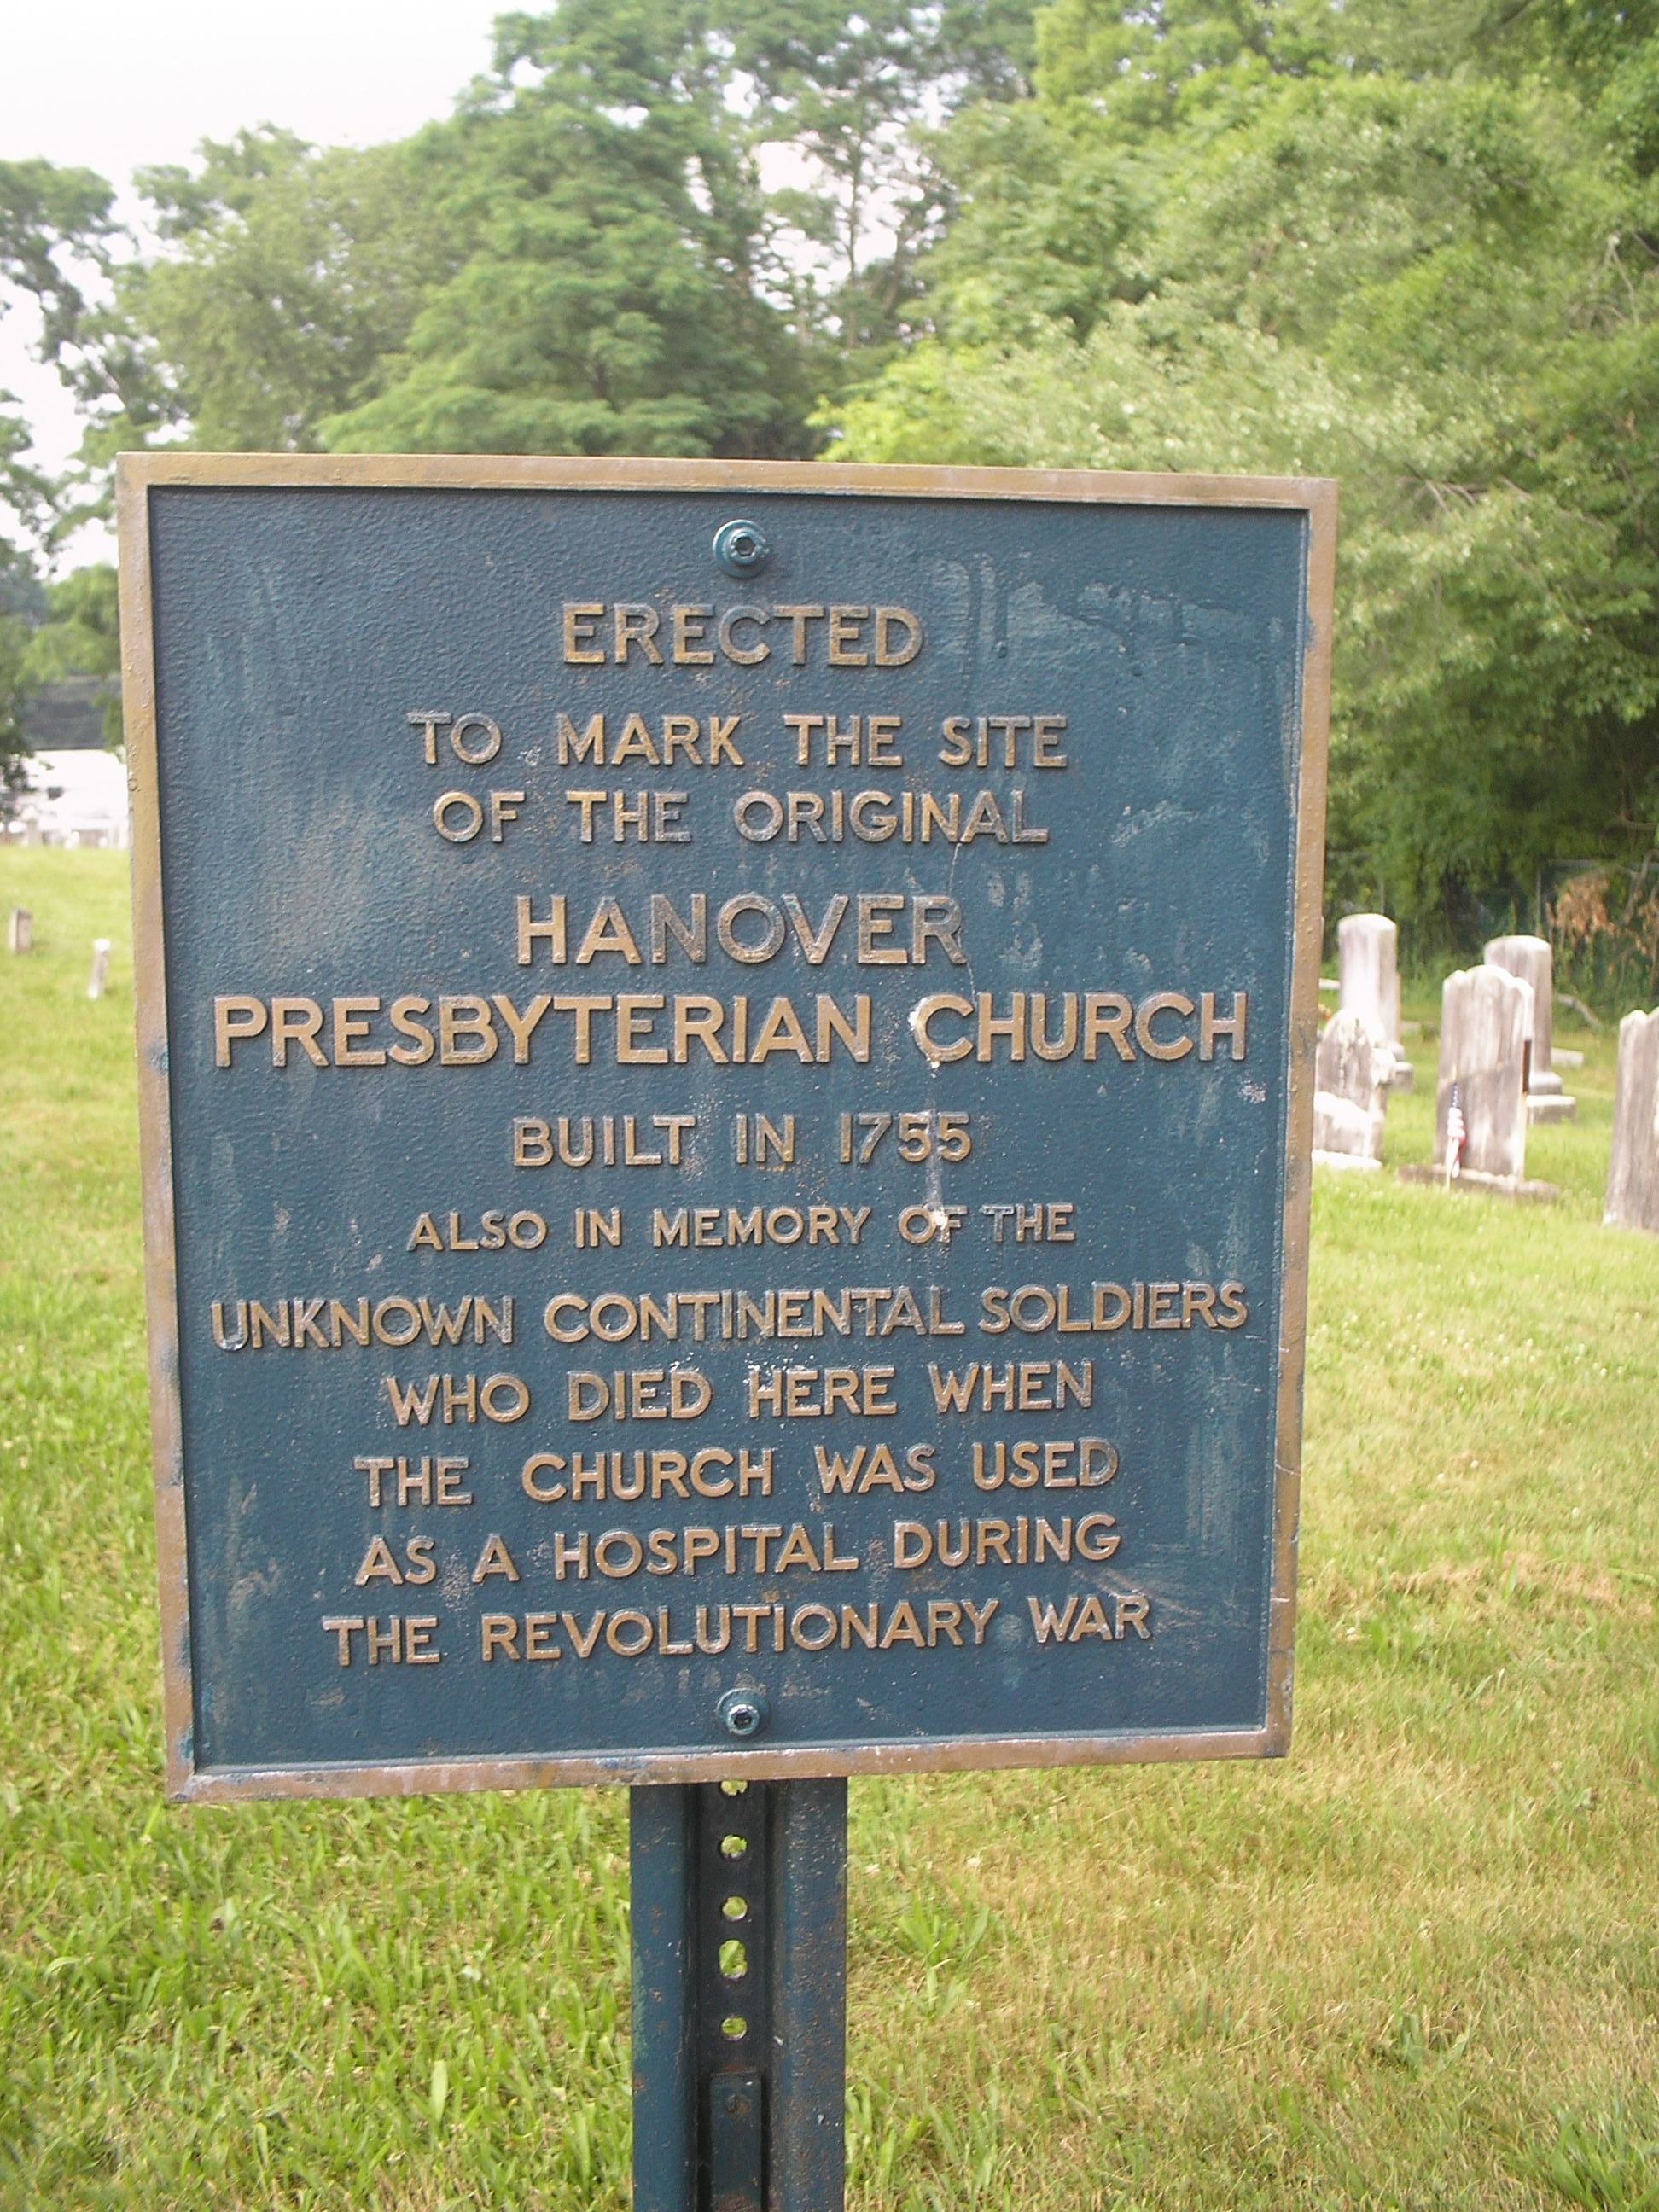 Hanover Presbyterian Church & Unknown Continental Soldiers Marker